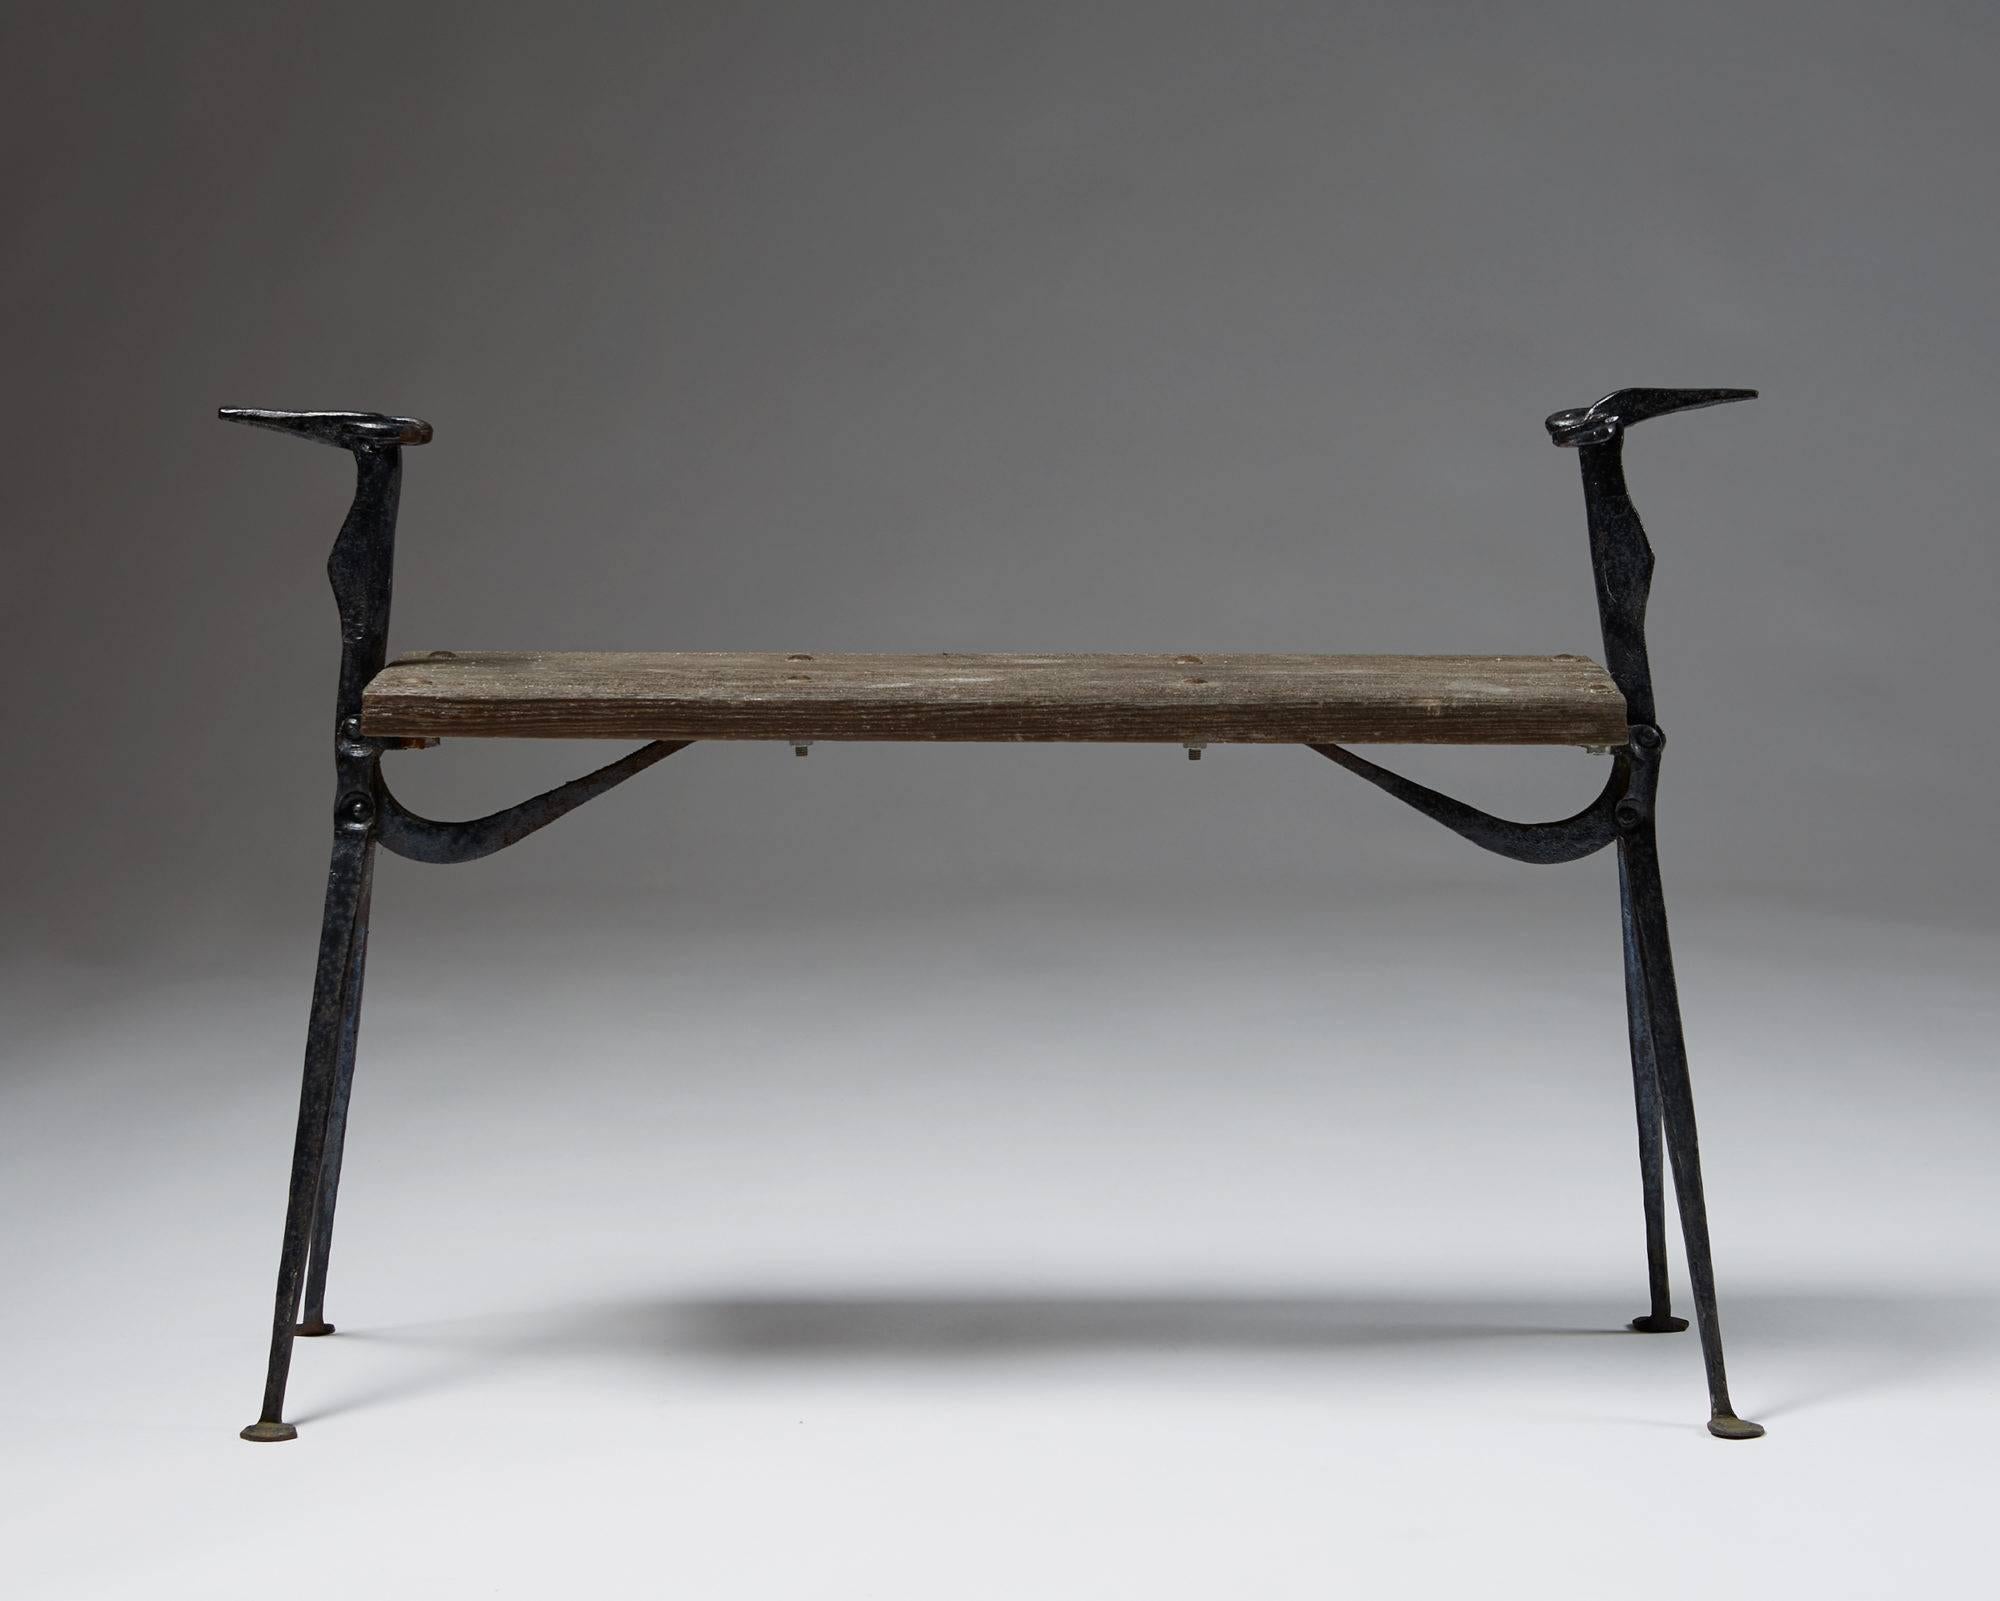 Bench designed by Folke Mattsson, Sweden, 1980s.
Forged iron and solid wood.
Signed FM.

Measures: H: 62 cm/ 24 1/2''
L: 94 cm/ 37''
SH: 44 cm/ 17 1/4''.
  